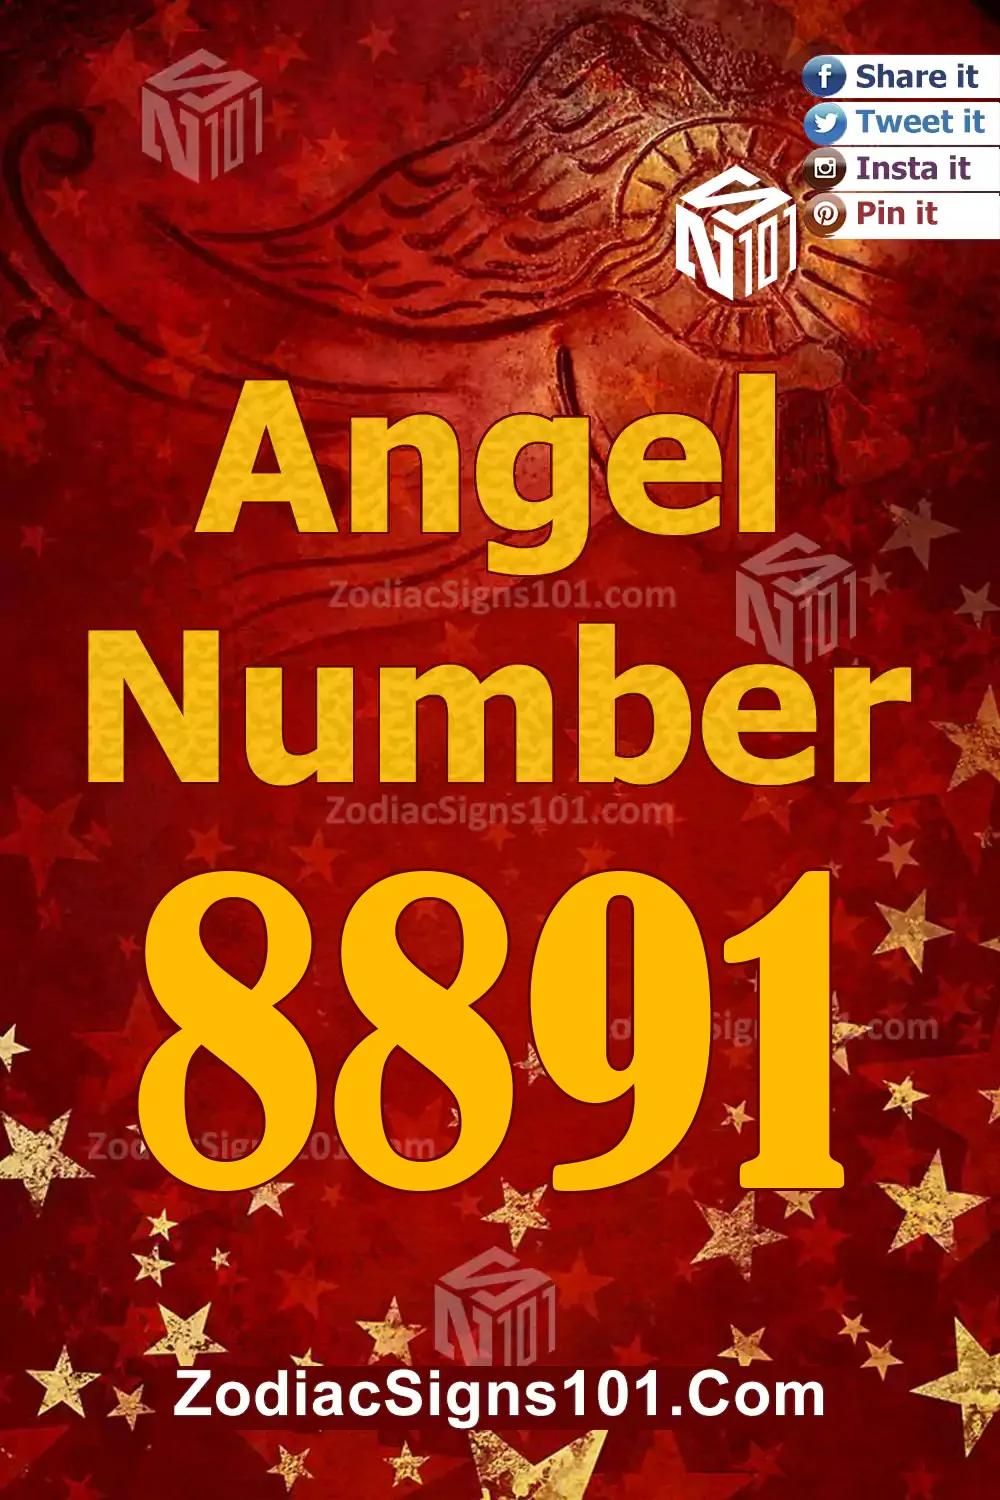 8891 Angel Number Meaning